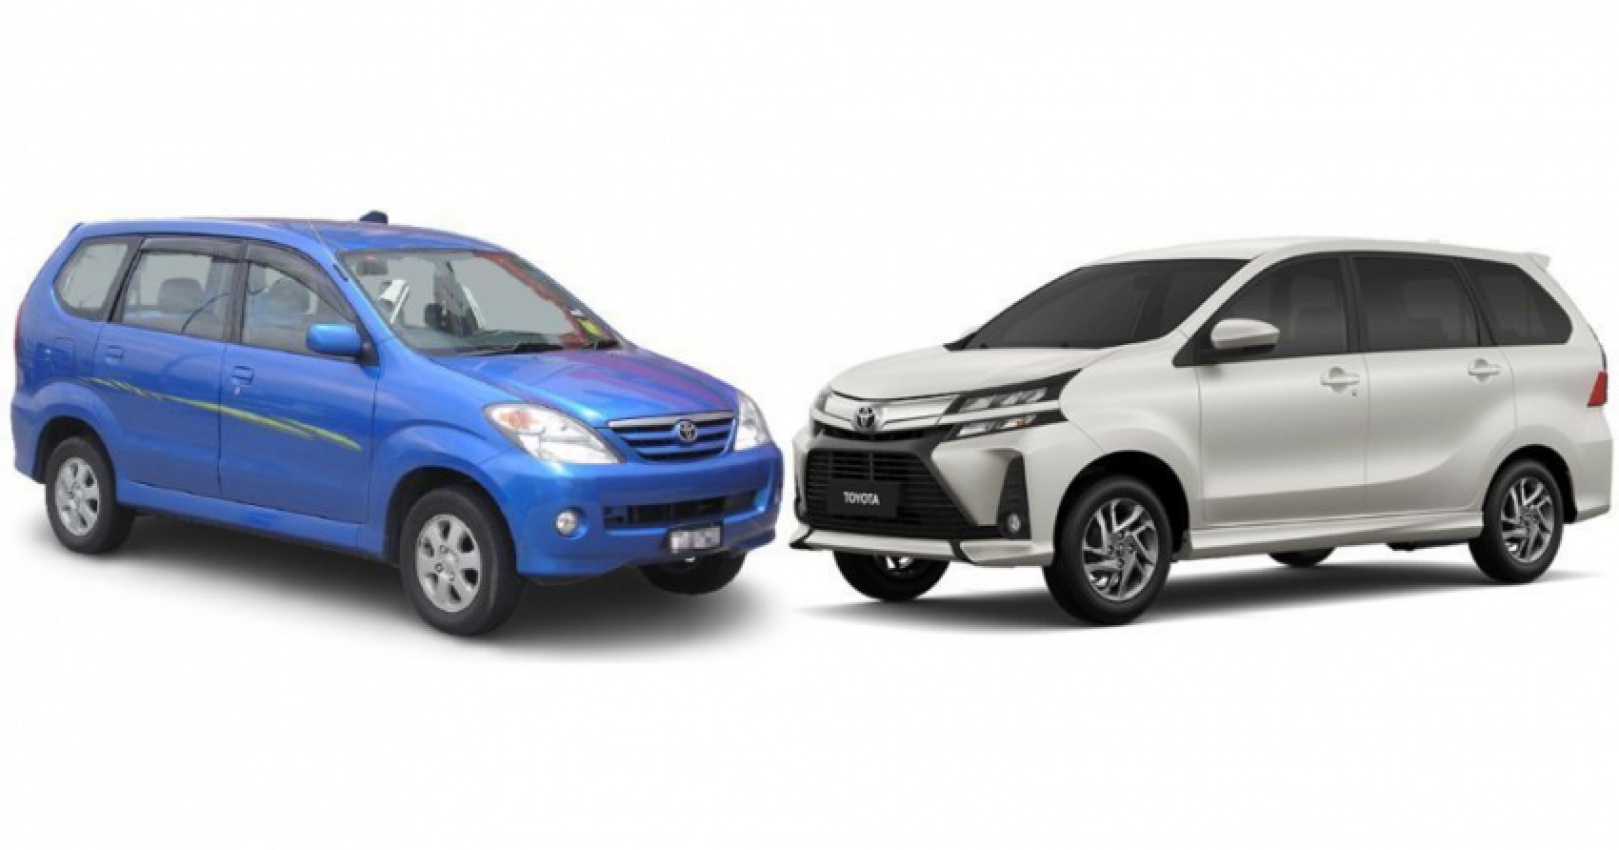 2022 Toyota Avanza Rendering Fwd And Hybrid Powertrain On The Cards Topcarnews